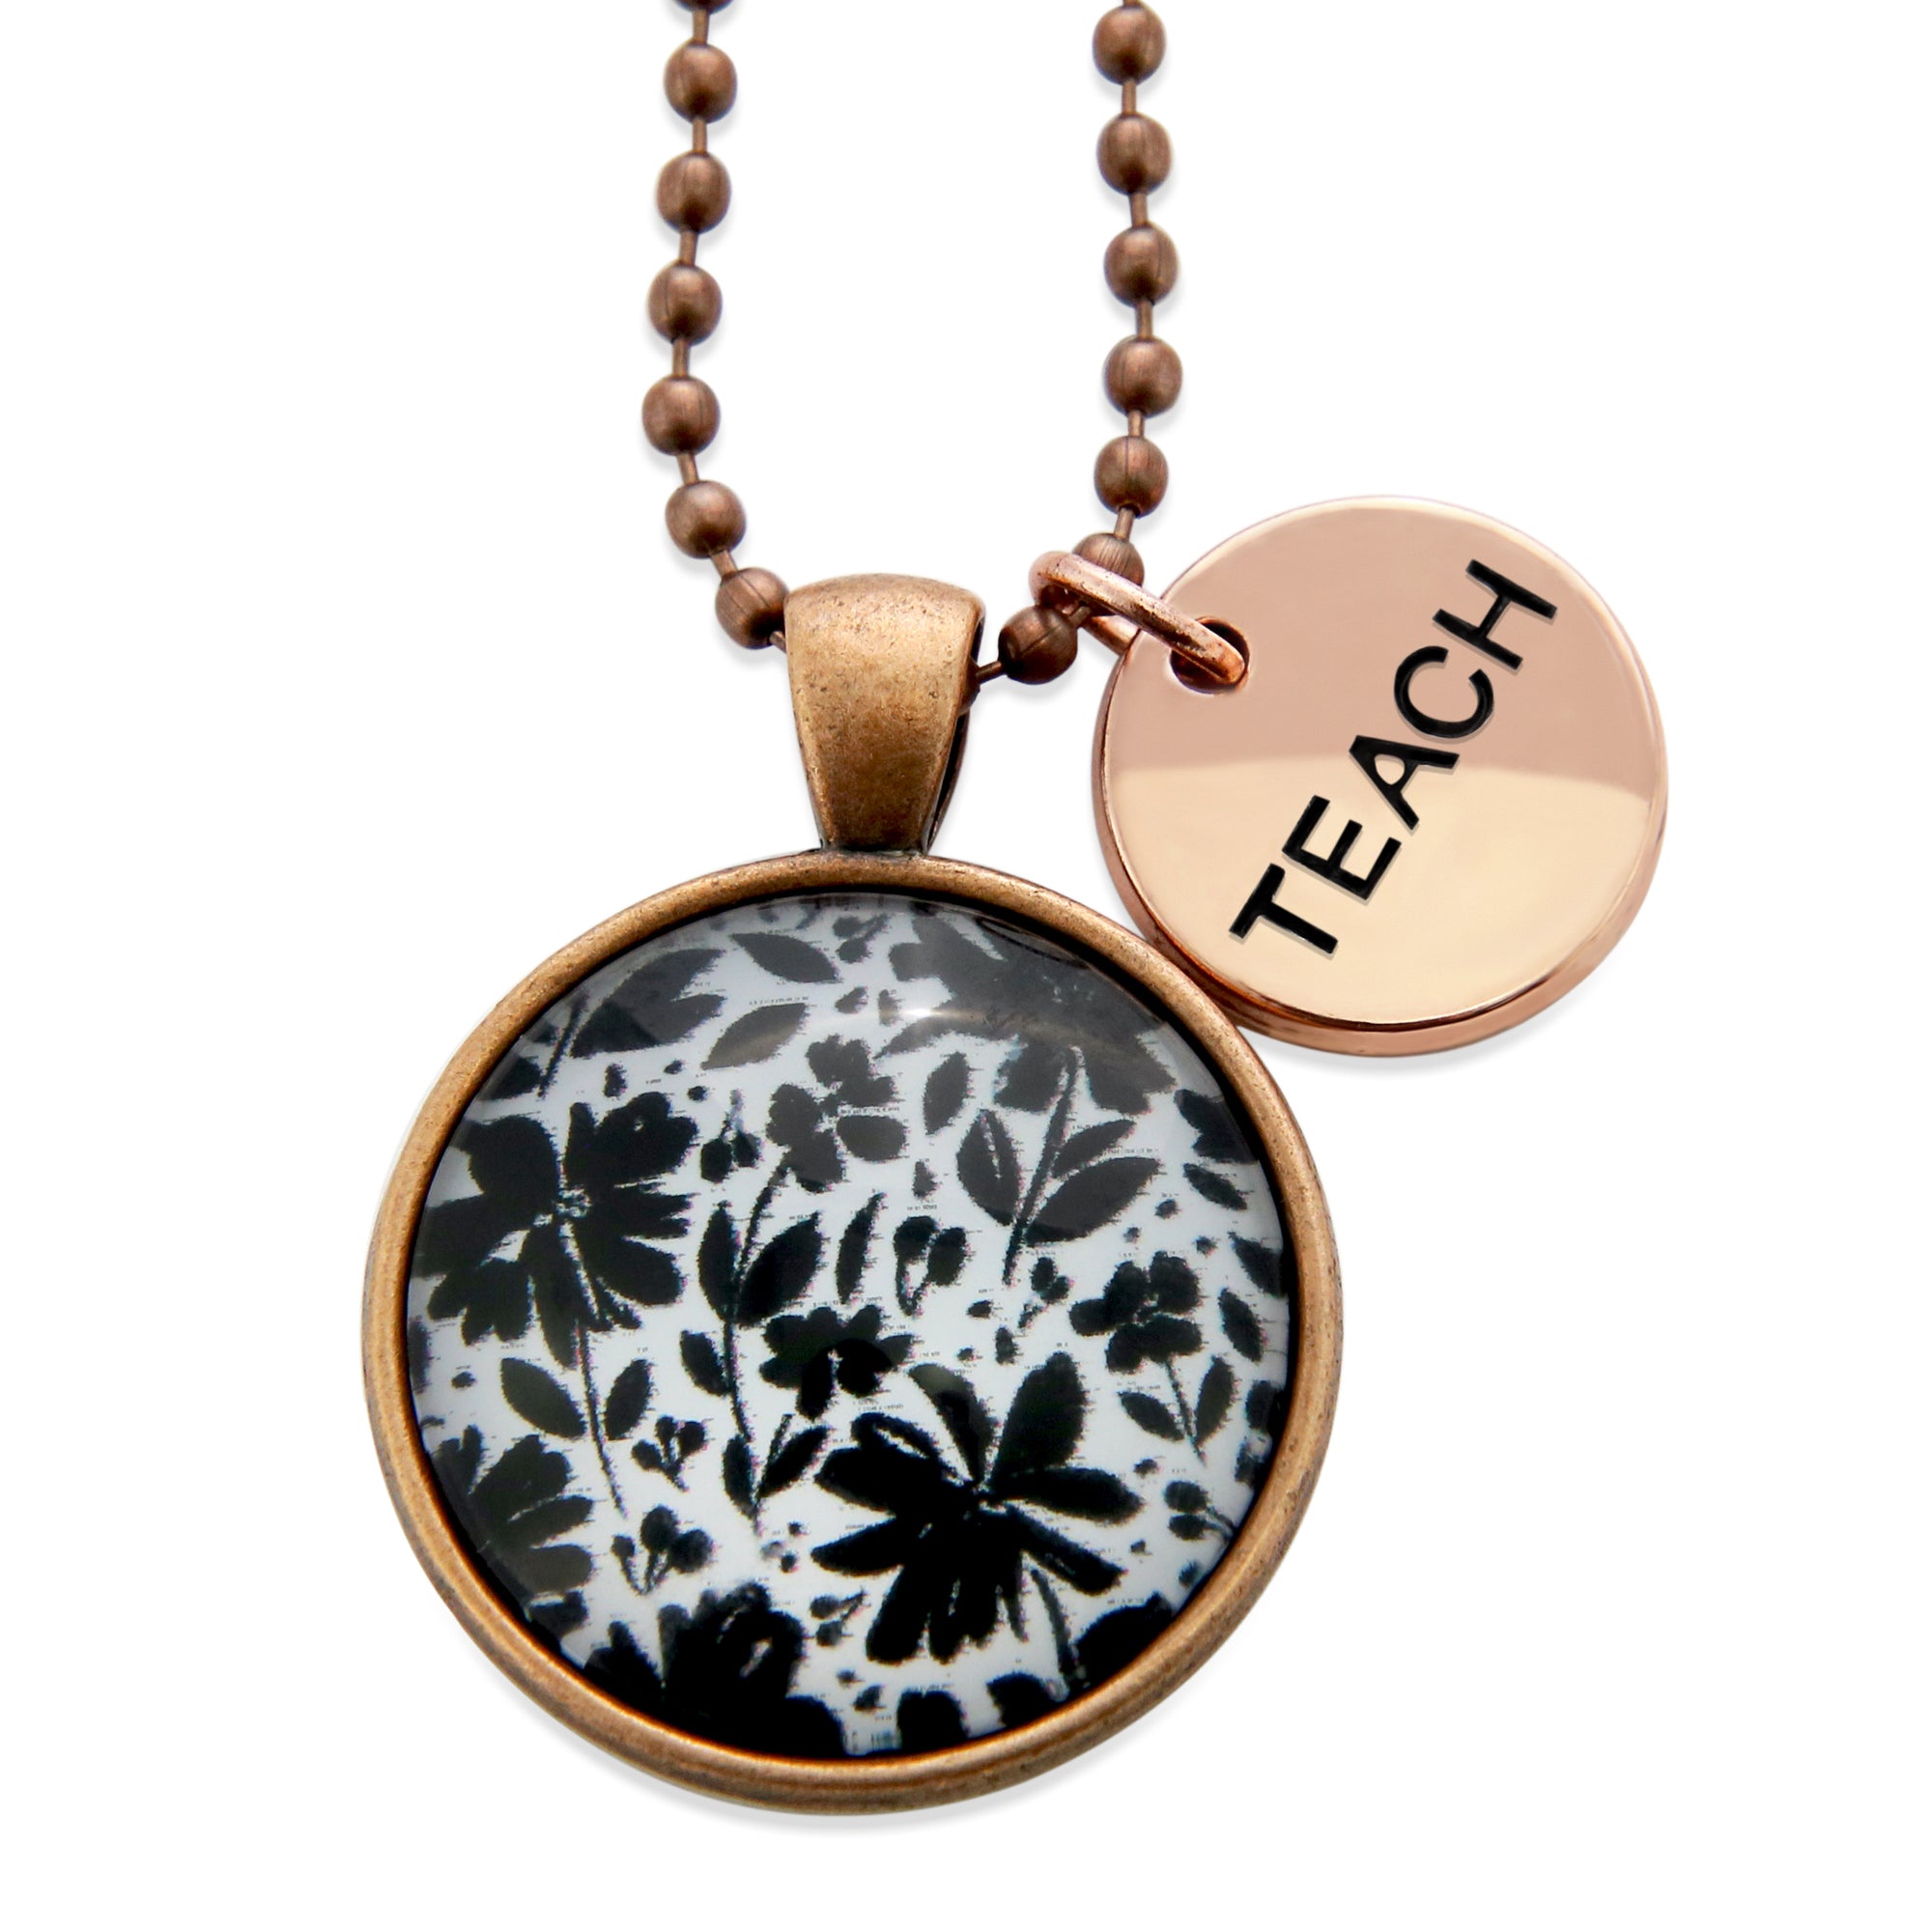 Black & White Collection - Vintage Copper 'TEACH' Necklace - Inky Buds (10615)